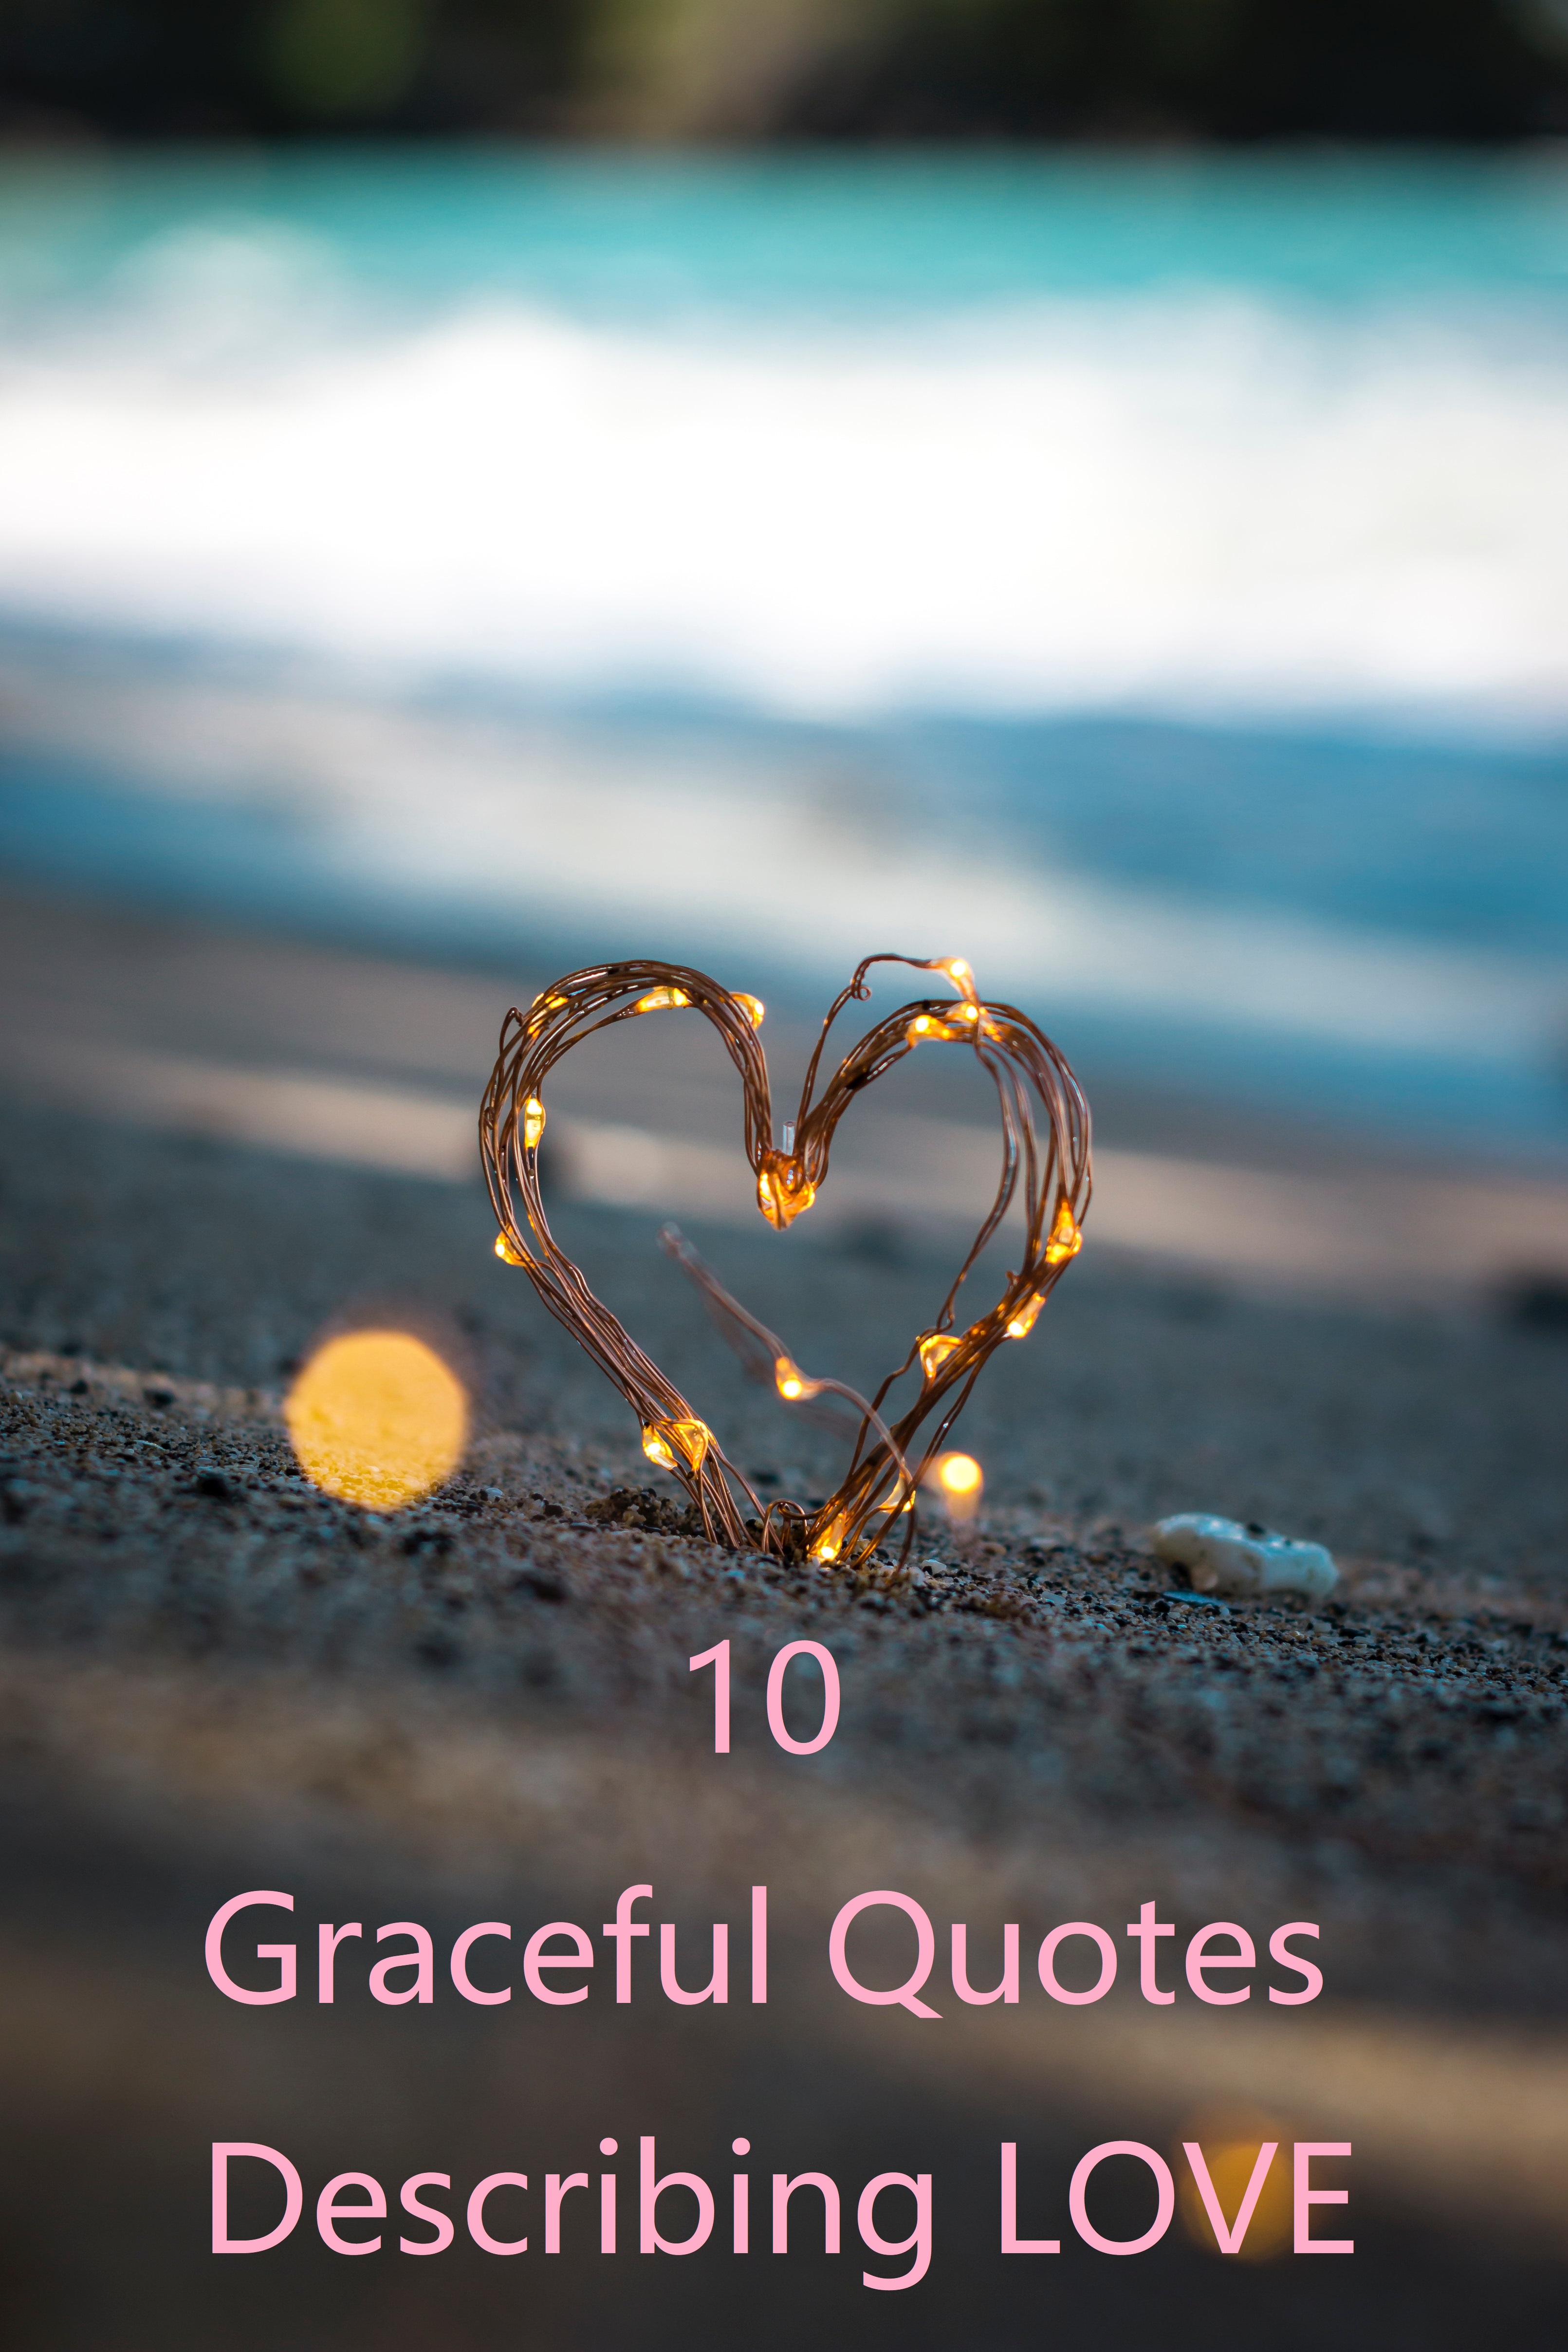 10-graceful-quotes-love